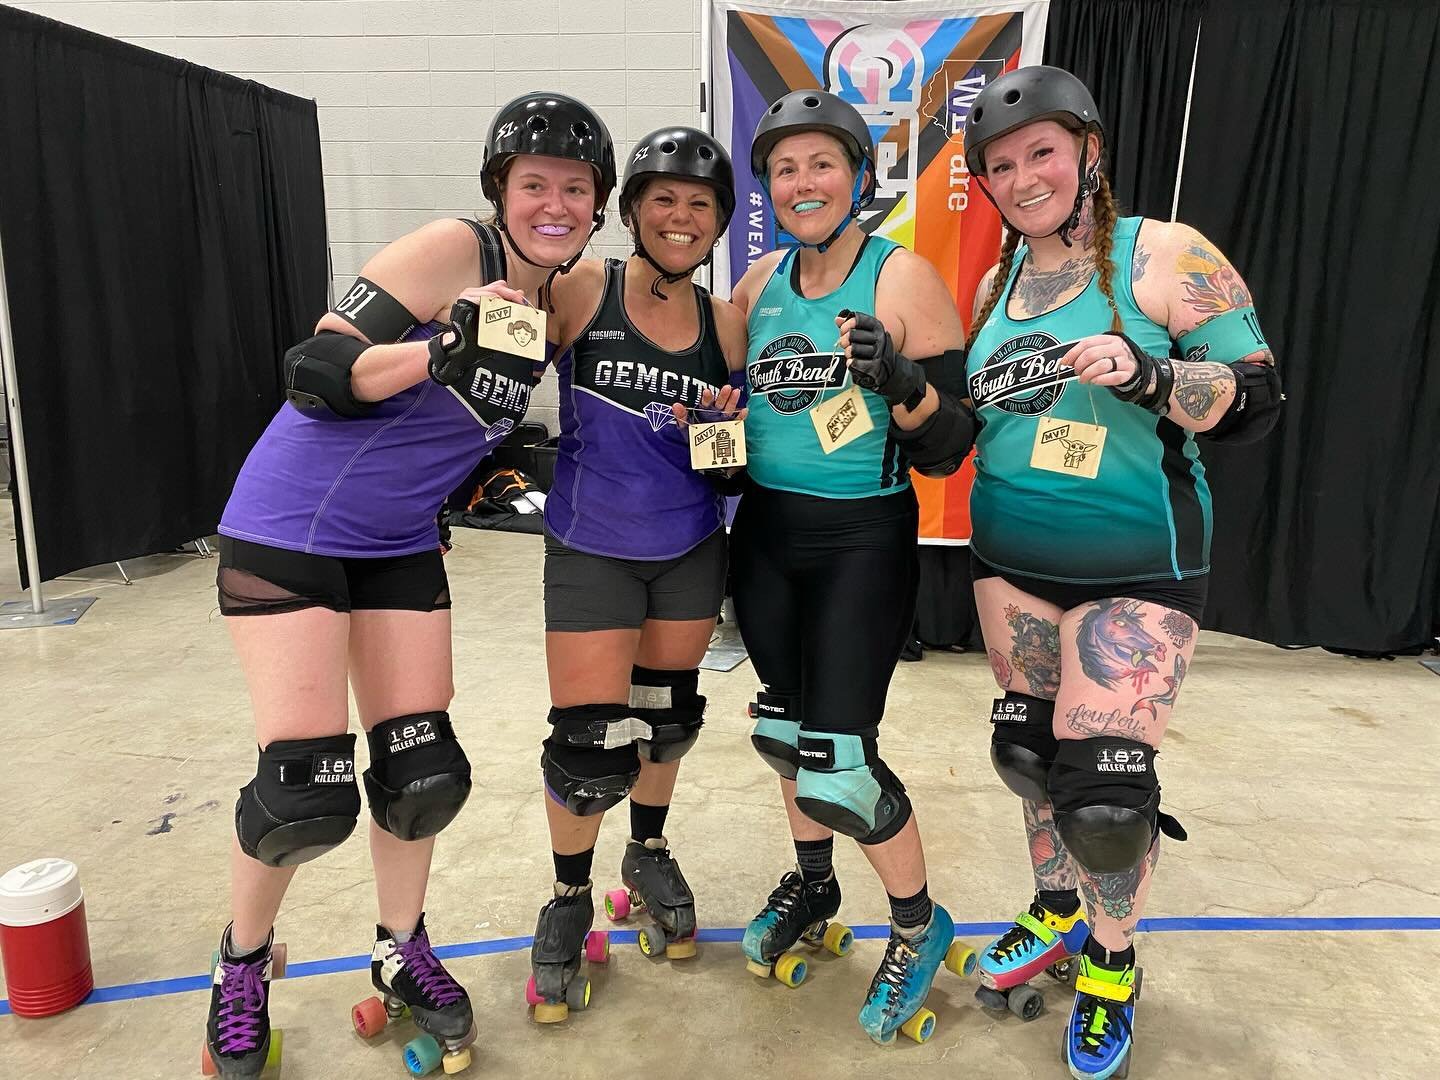 After a hard fought game, SBRD takes the win over @gemcityrollerderby! Thank you so much for such a fun game GCRD!! We had a blast skating with you all 🖤💙🖤💙 Congratulations to our MVPs - Alotta Pushie and Smash Bandicute!